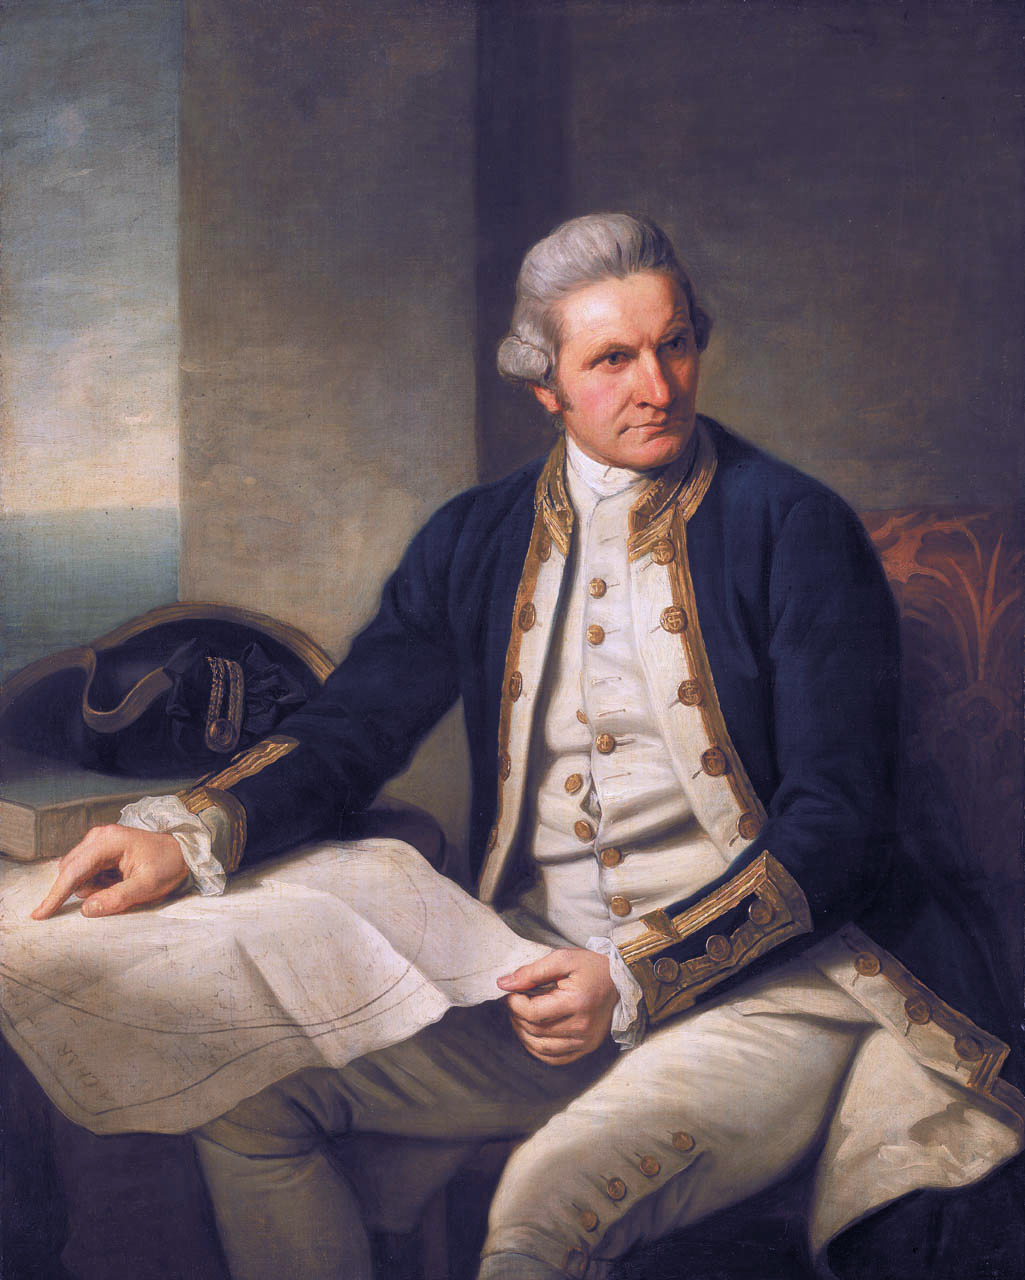 August 21, 1770 CE – James Cook Declares Eastern Australia for Great Britain